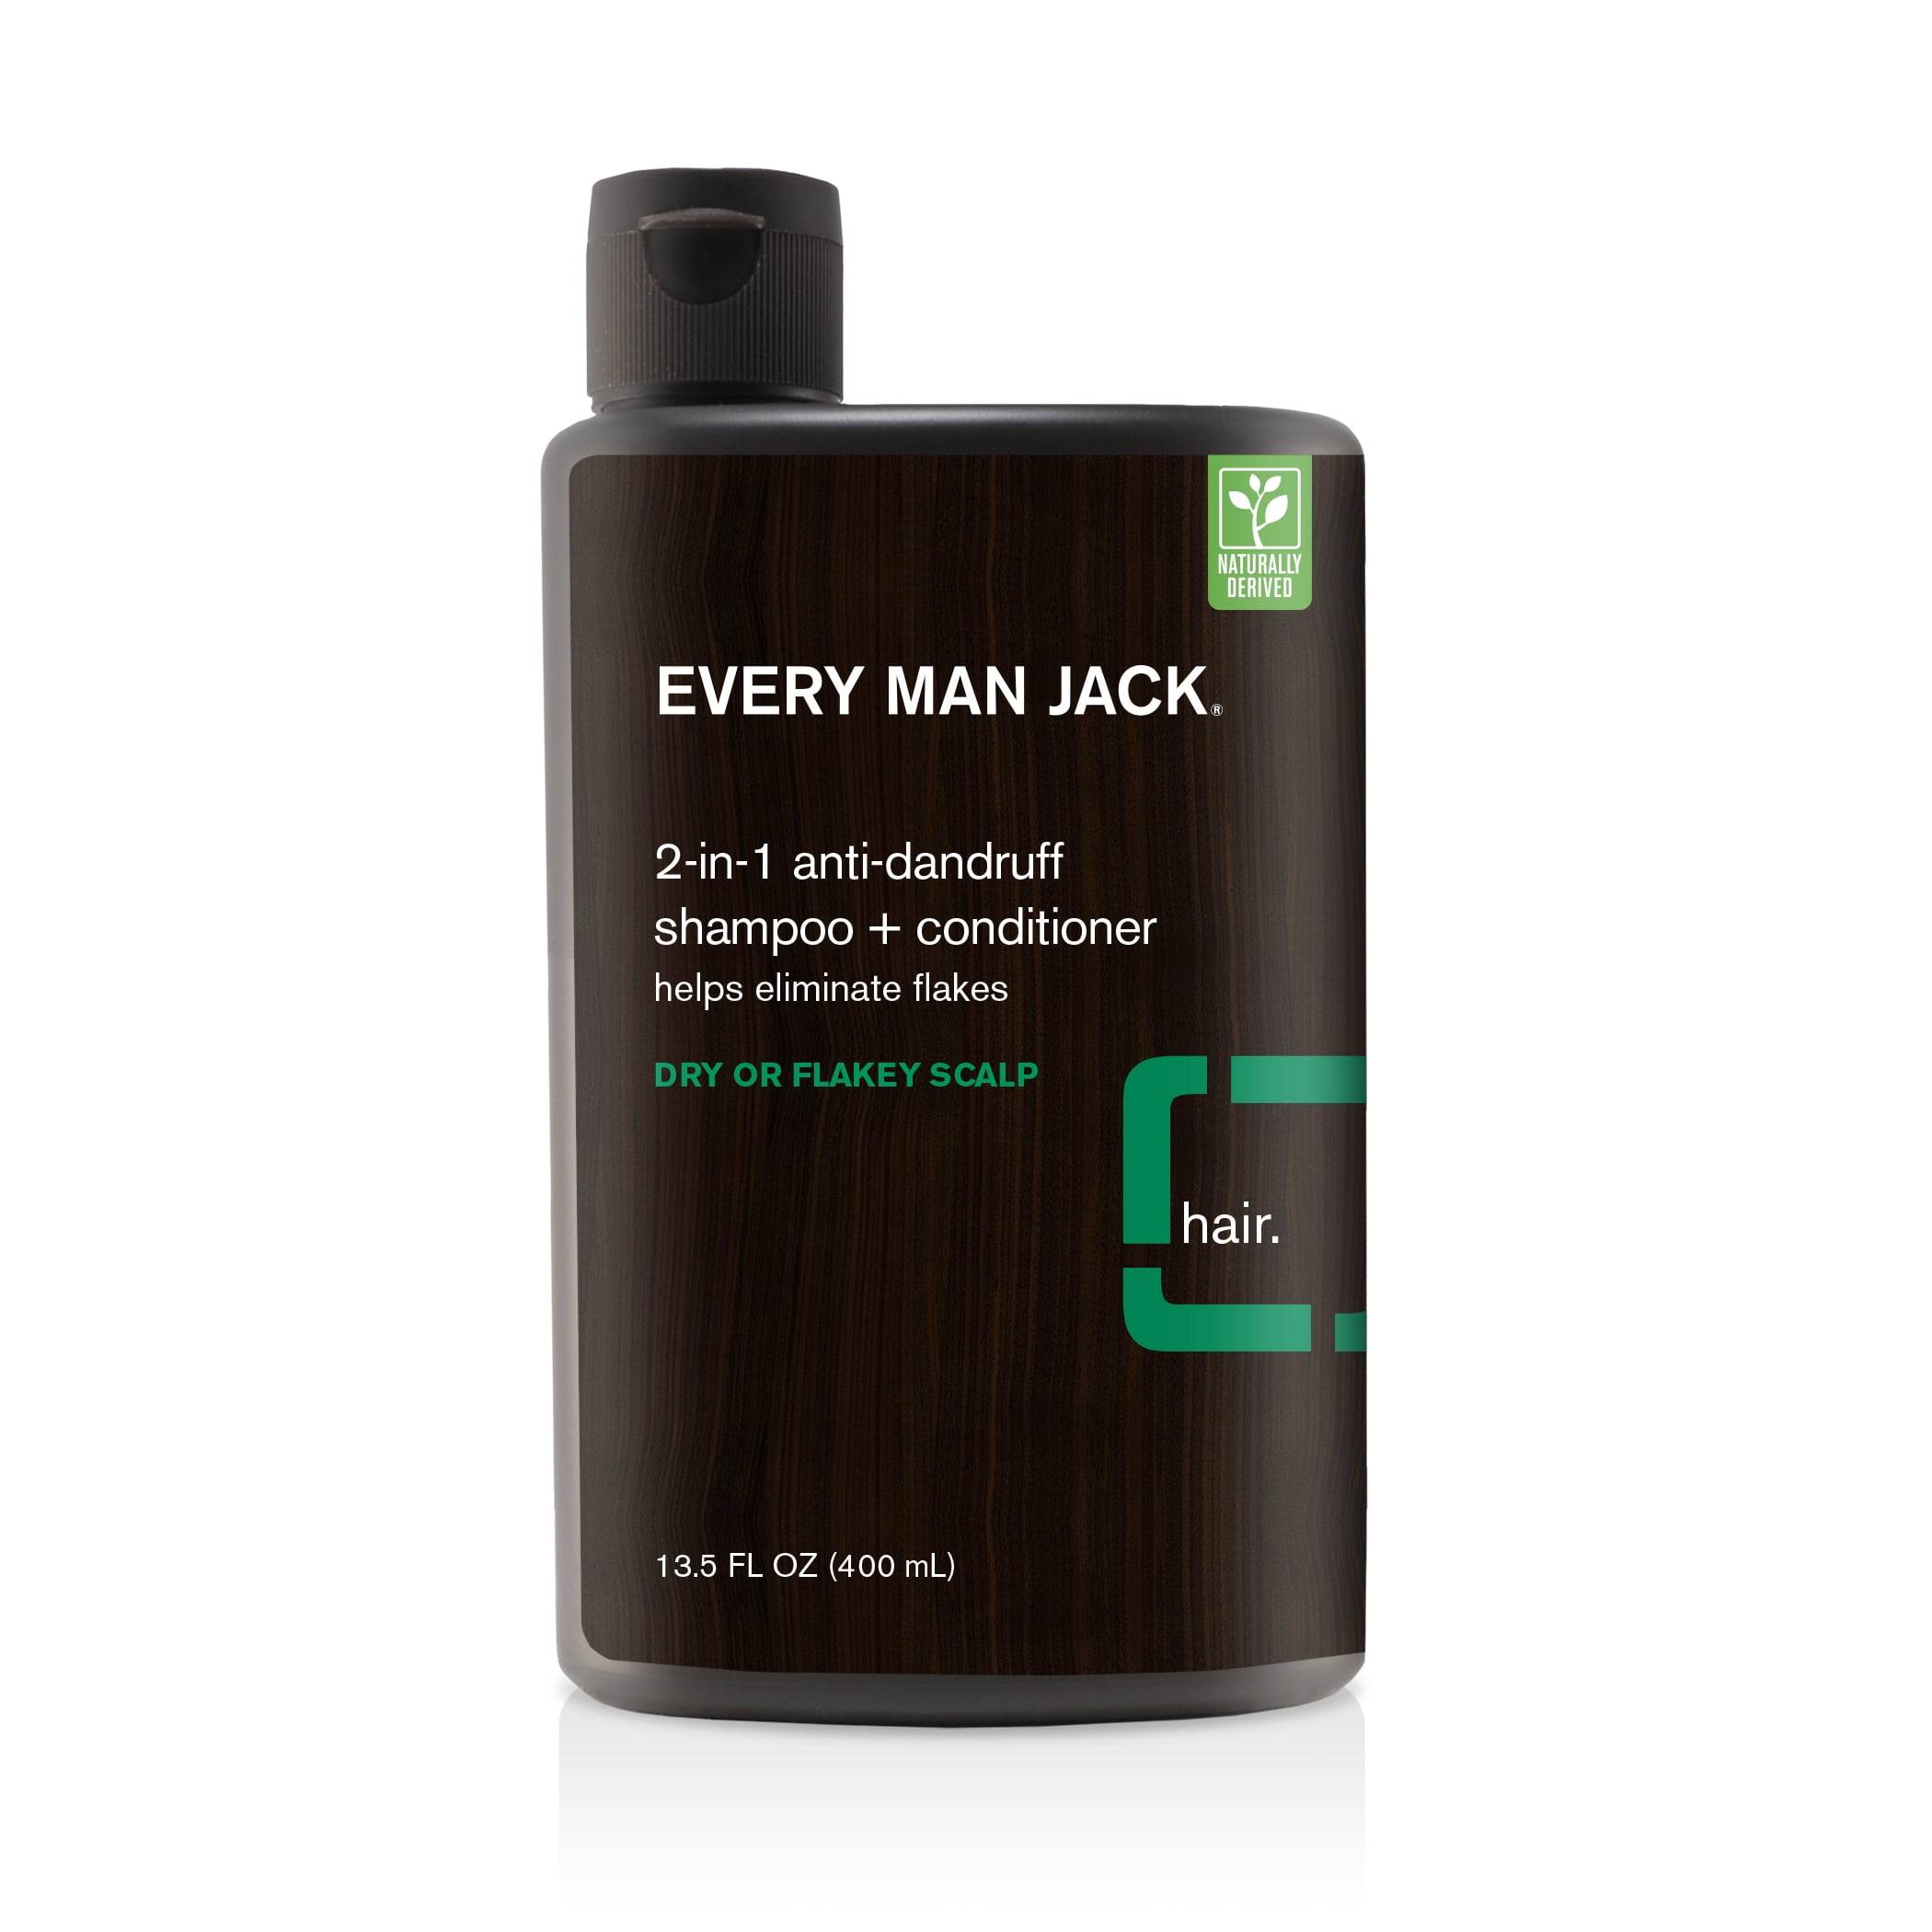 Every Man Jack Anti-Dandruff Eucalyptus Mint 2-in-1 Shampoo and Conditioner  